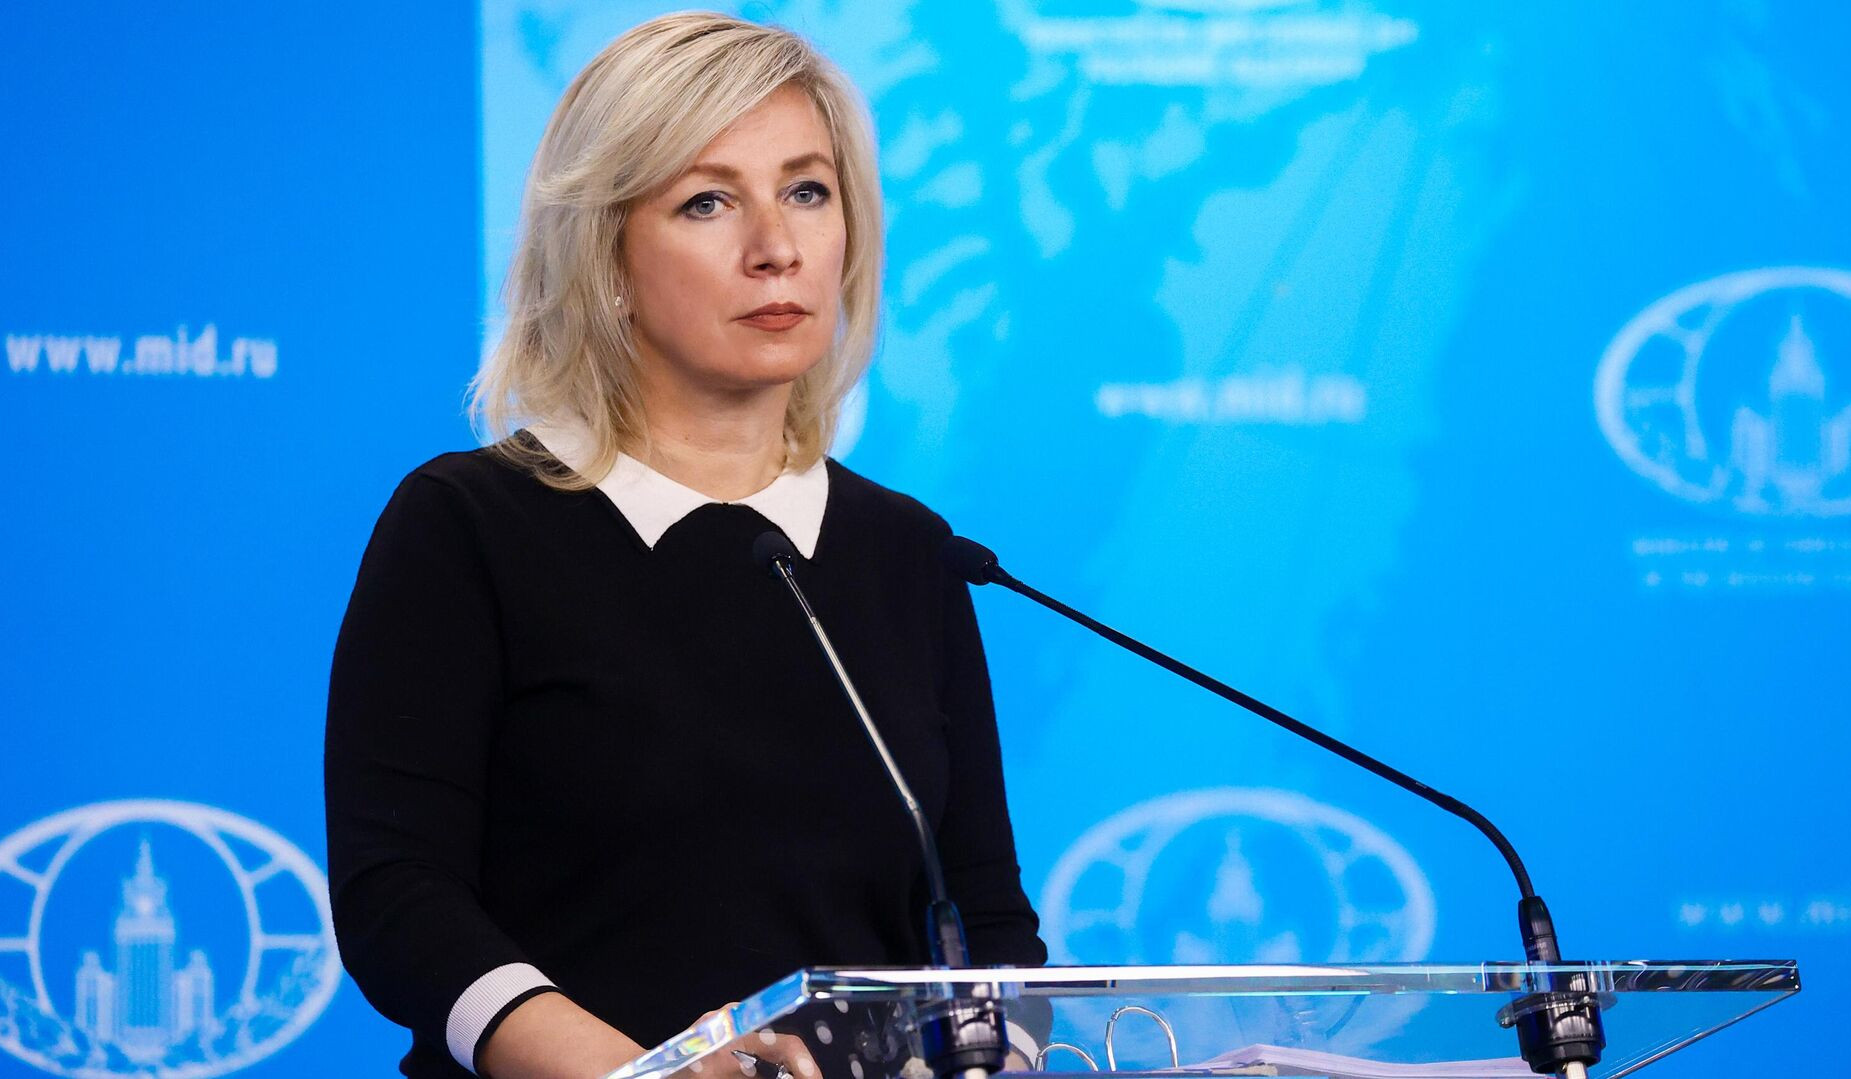 Important to refrain from inflammatory rhetoric which could lead to escalation of the situation in the region, Zakharova